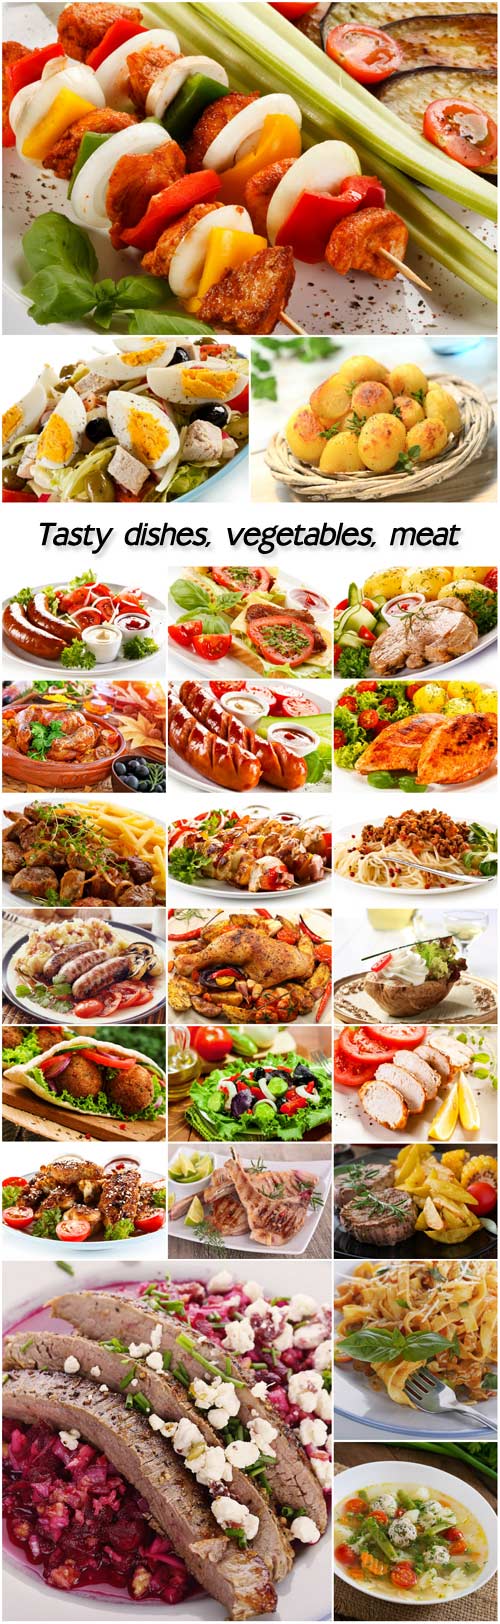 Tasty dishes, vegetables, meat